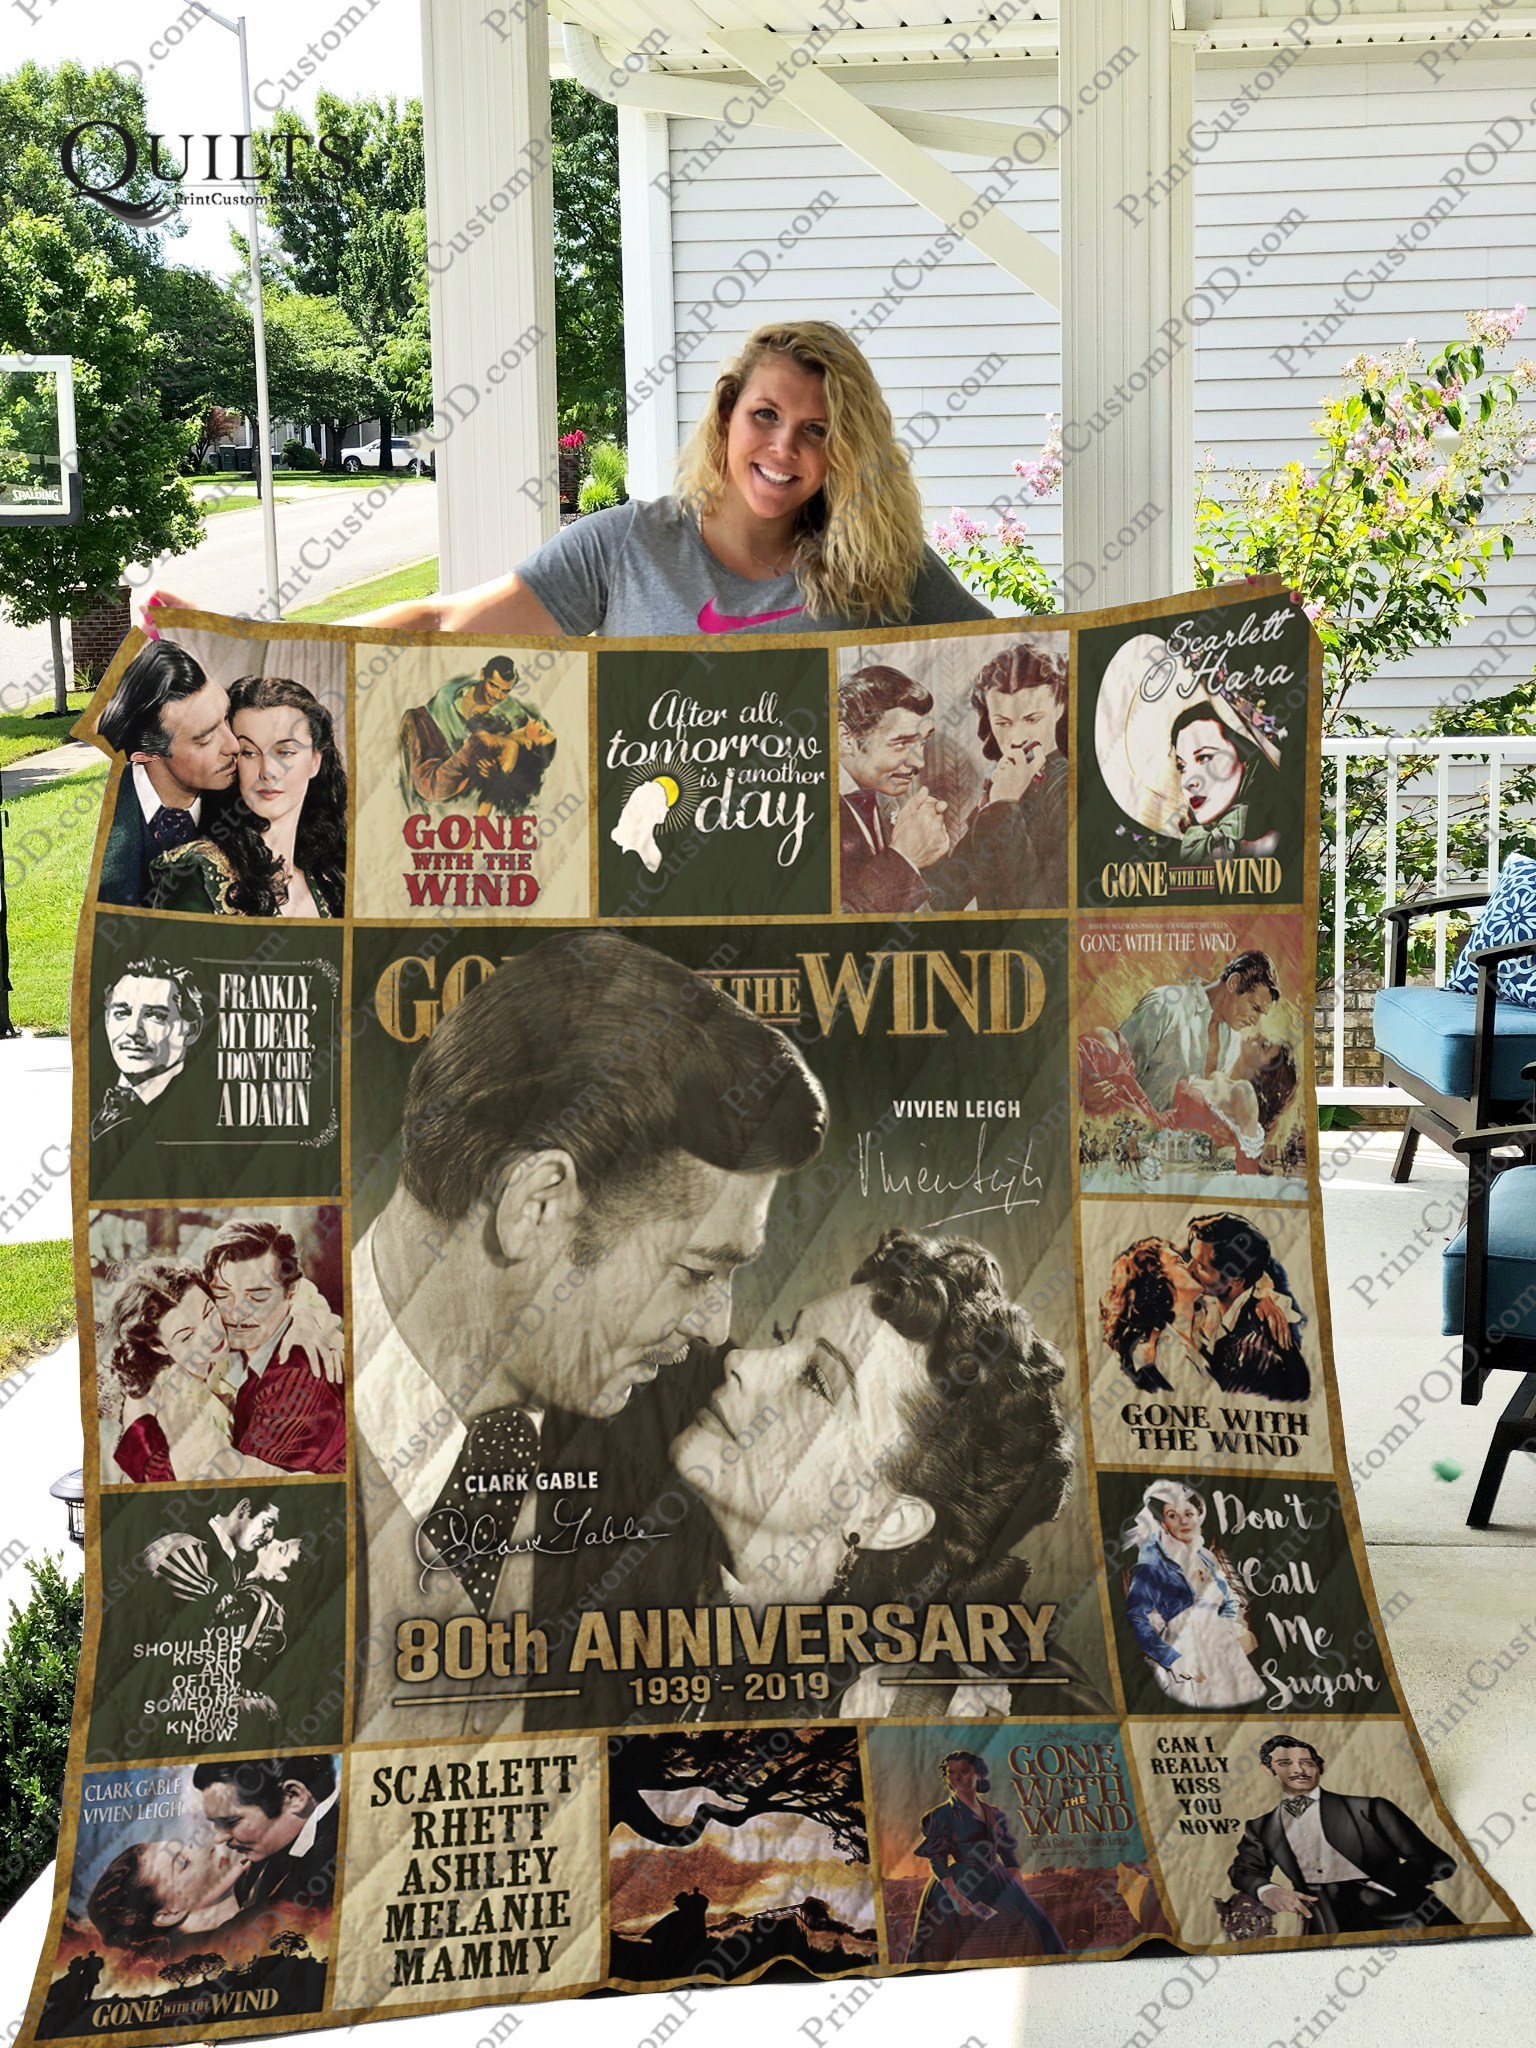 Gone with the wind 80th anniversary quilt – maria